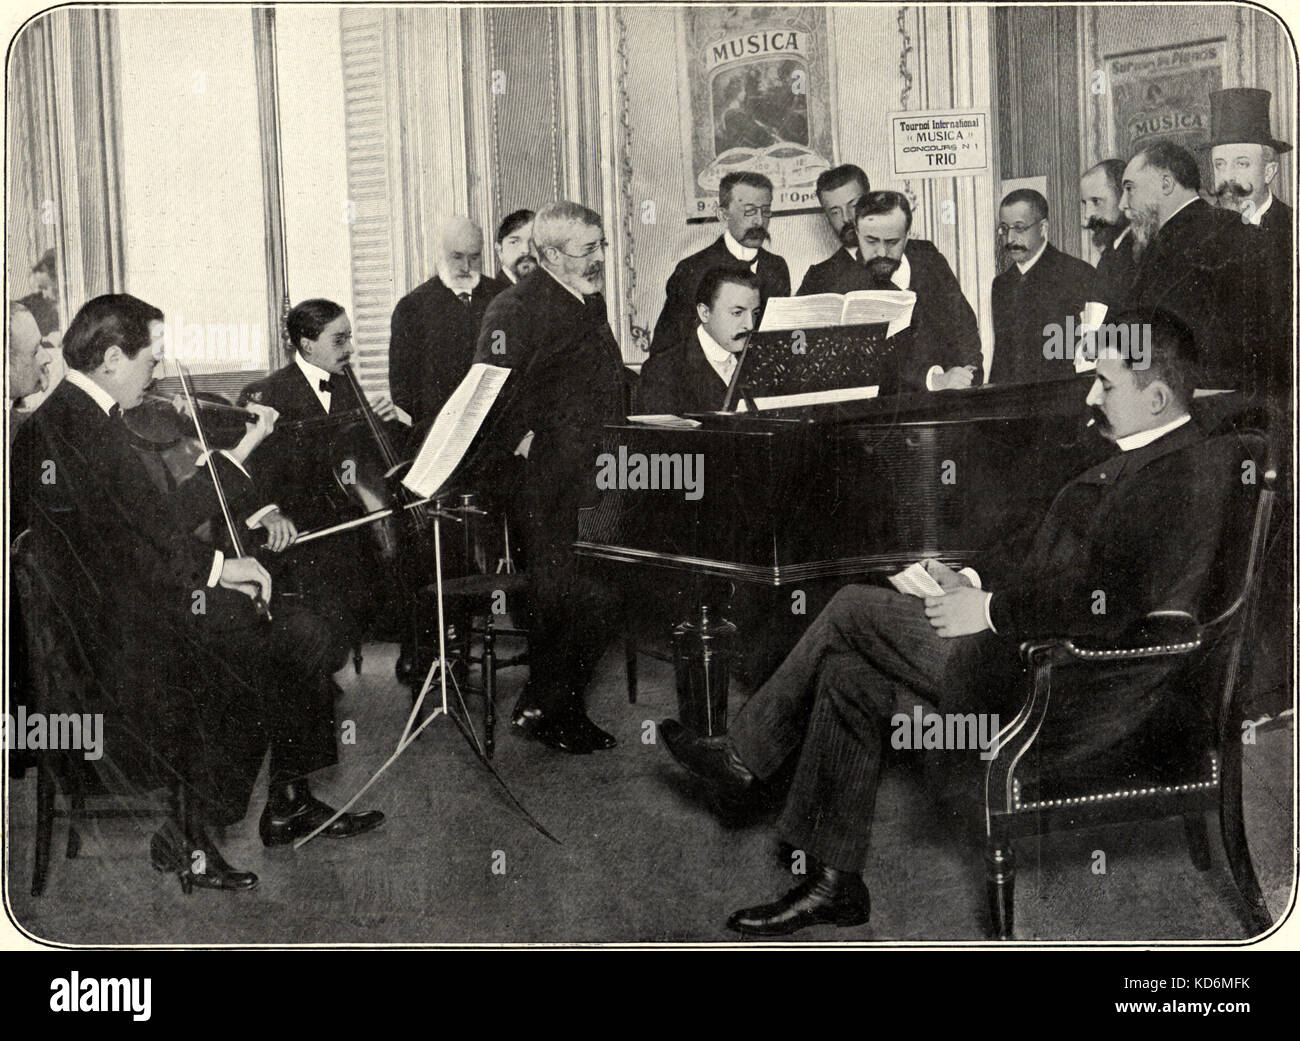 Jury of Musica trio contest, December 1903. From left to right: director of piano manufacturers Erard Mr Blondel, violinist Mr Alexanian, Musica editor A. Durand, composer Claude Debussy, conductor Mr Taffanel, composer Moritz Moszkowski  / Moskowski, pianist Aimé Lachaume, composer Pierre Lalo, composer Paul Dukas, composer André Dedalge, editor E. Fromont, opera librarian Charles Malherbe, violinist Armand Parent, critic Henry Gauthier-Villars. Stock Photo